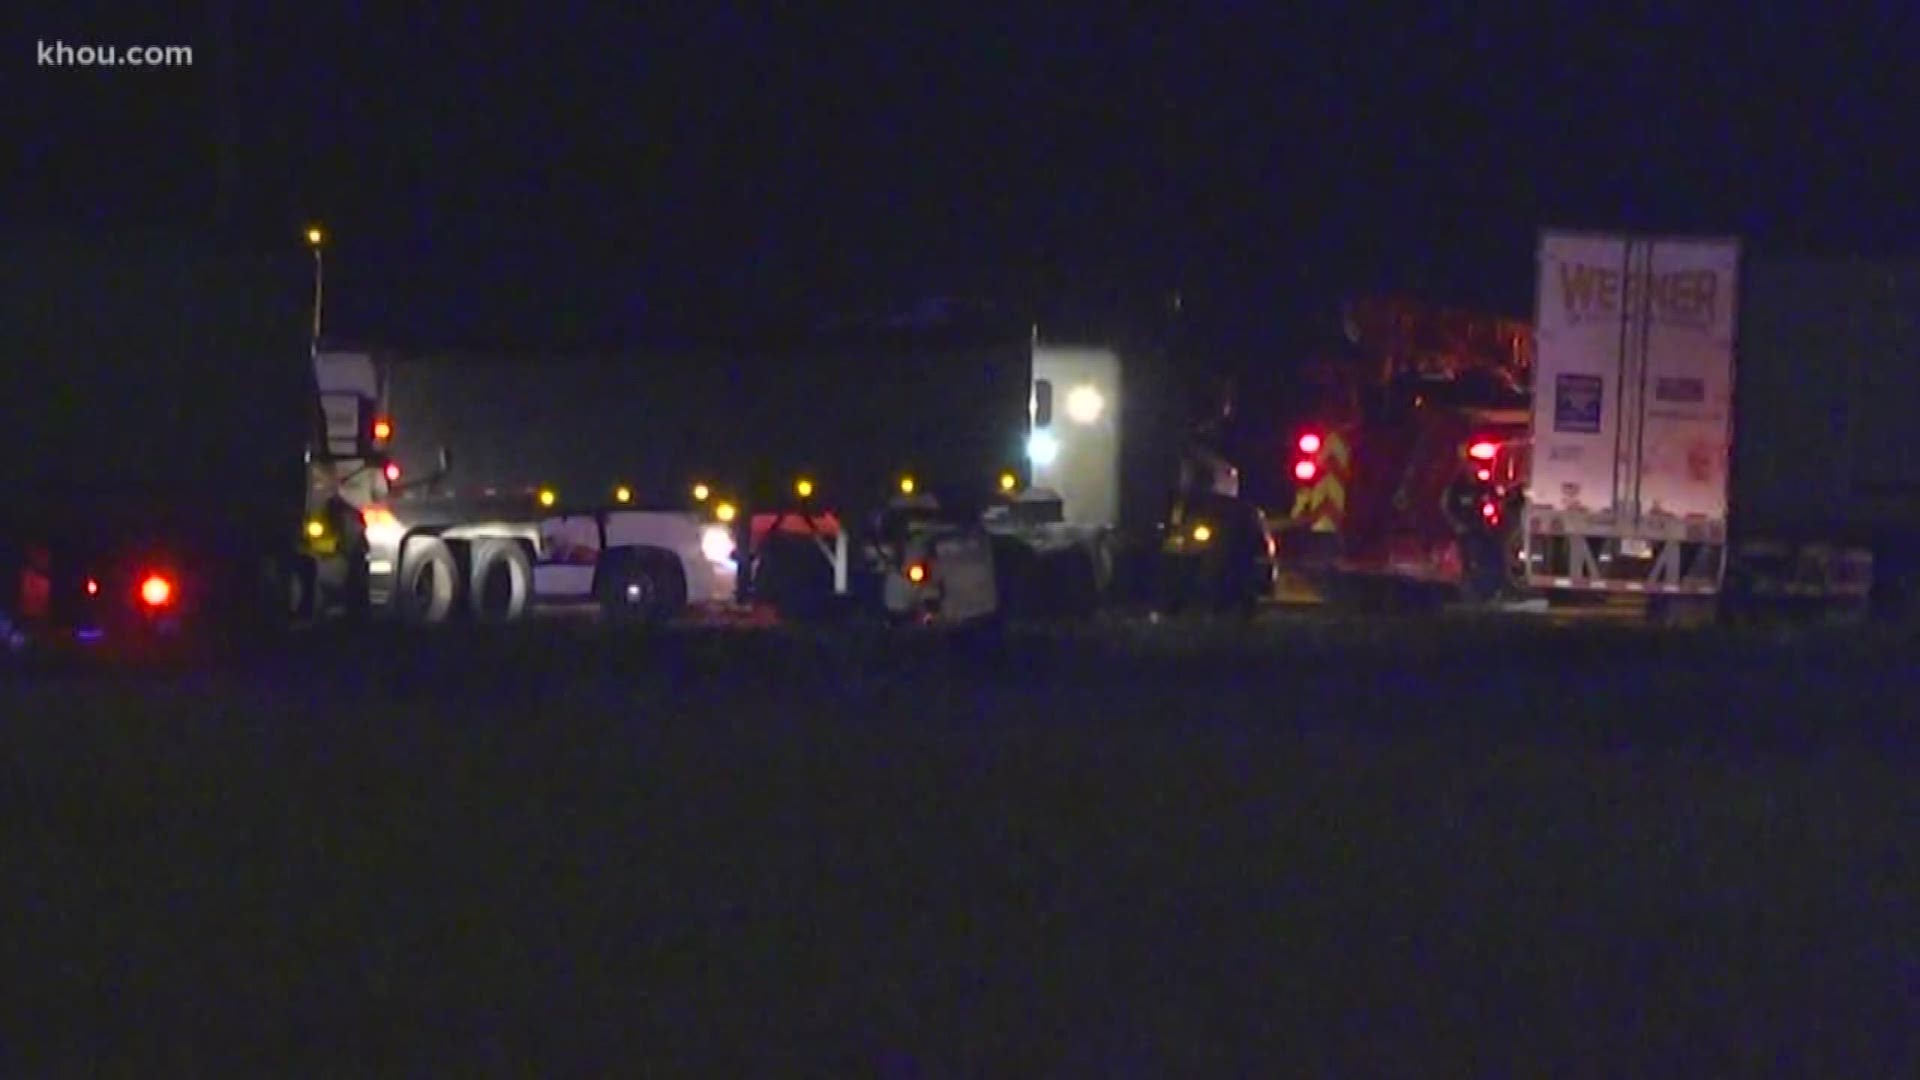 All westbound lanes of I-10 the Katy Freeway have been blocked since 3:30 a.m. Friday. Houston TranStar reports multiple vehicles, including big rigs, are blocked at Pederson. A hazmat team is cleaning up a fuel spill.